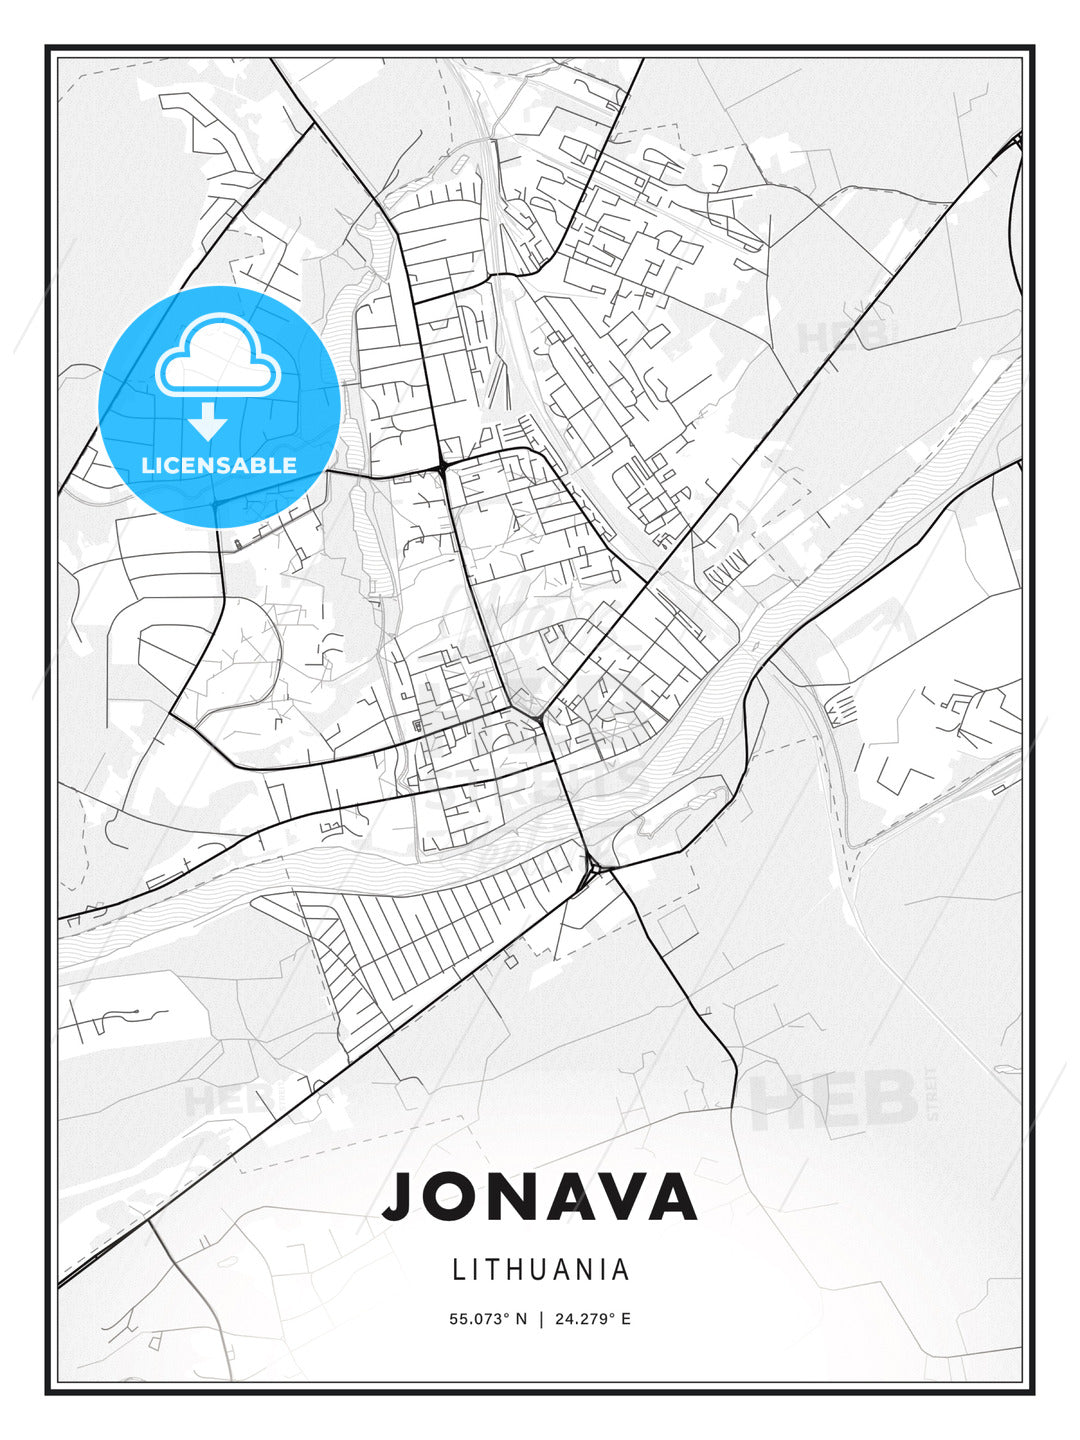 Jonava, Lithuania, Modern Print Template in Various Formats - HEBSTREITS Sketches